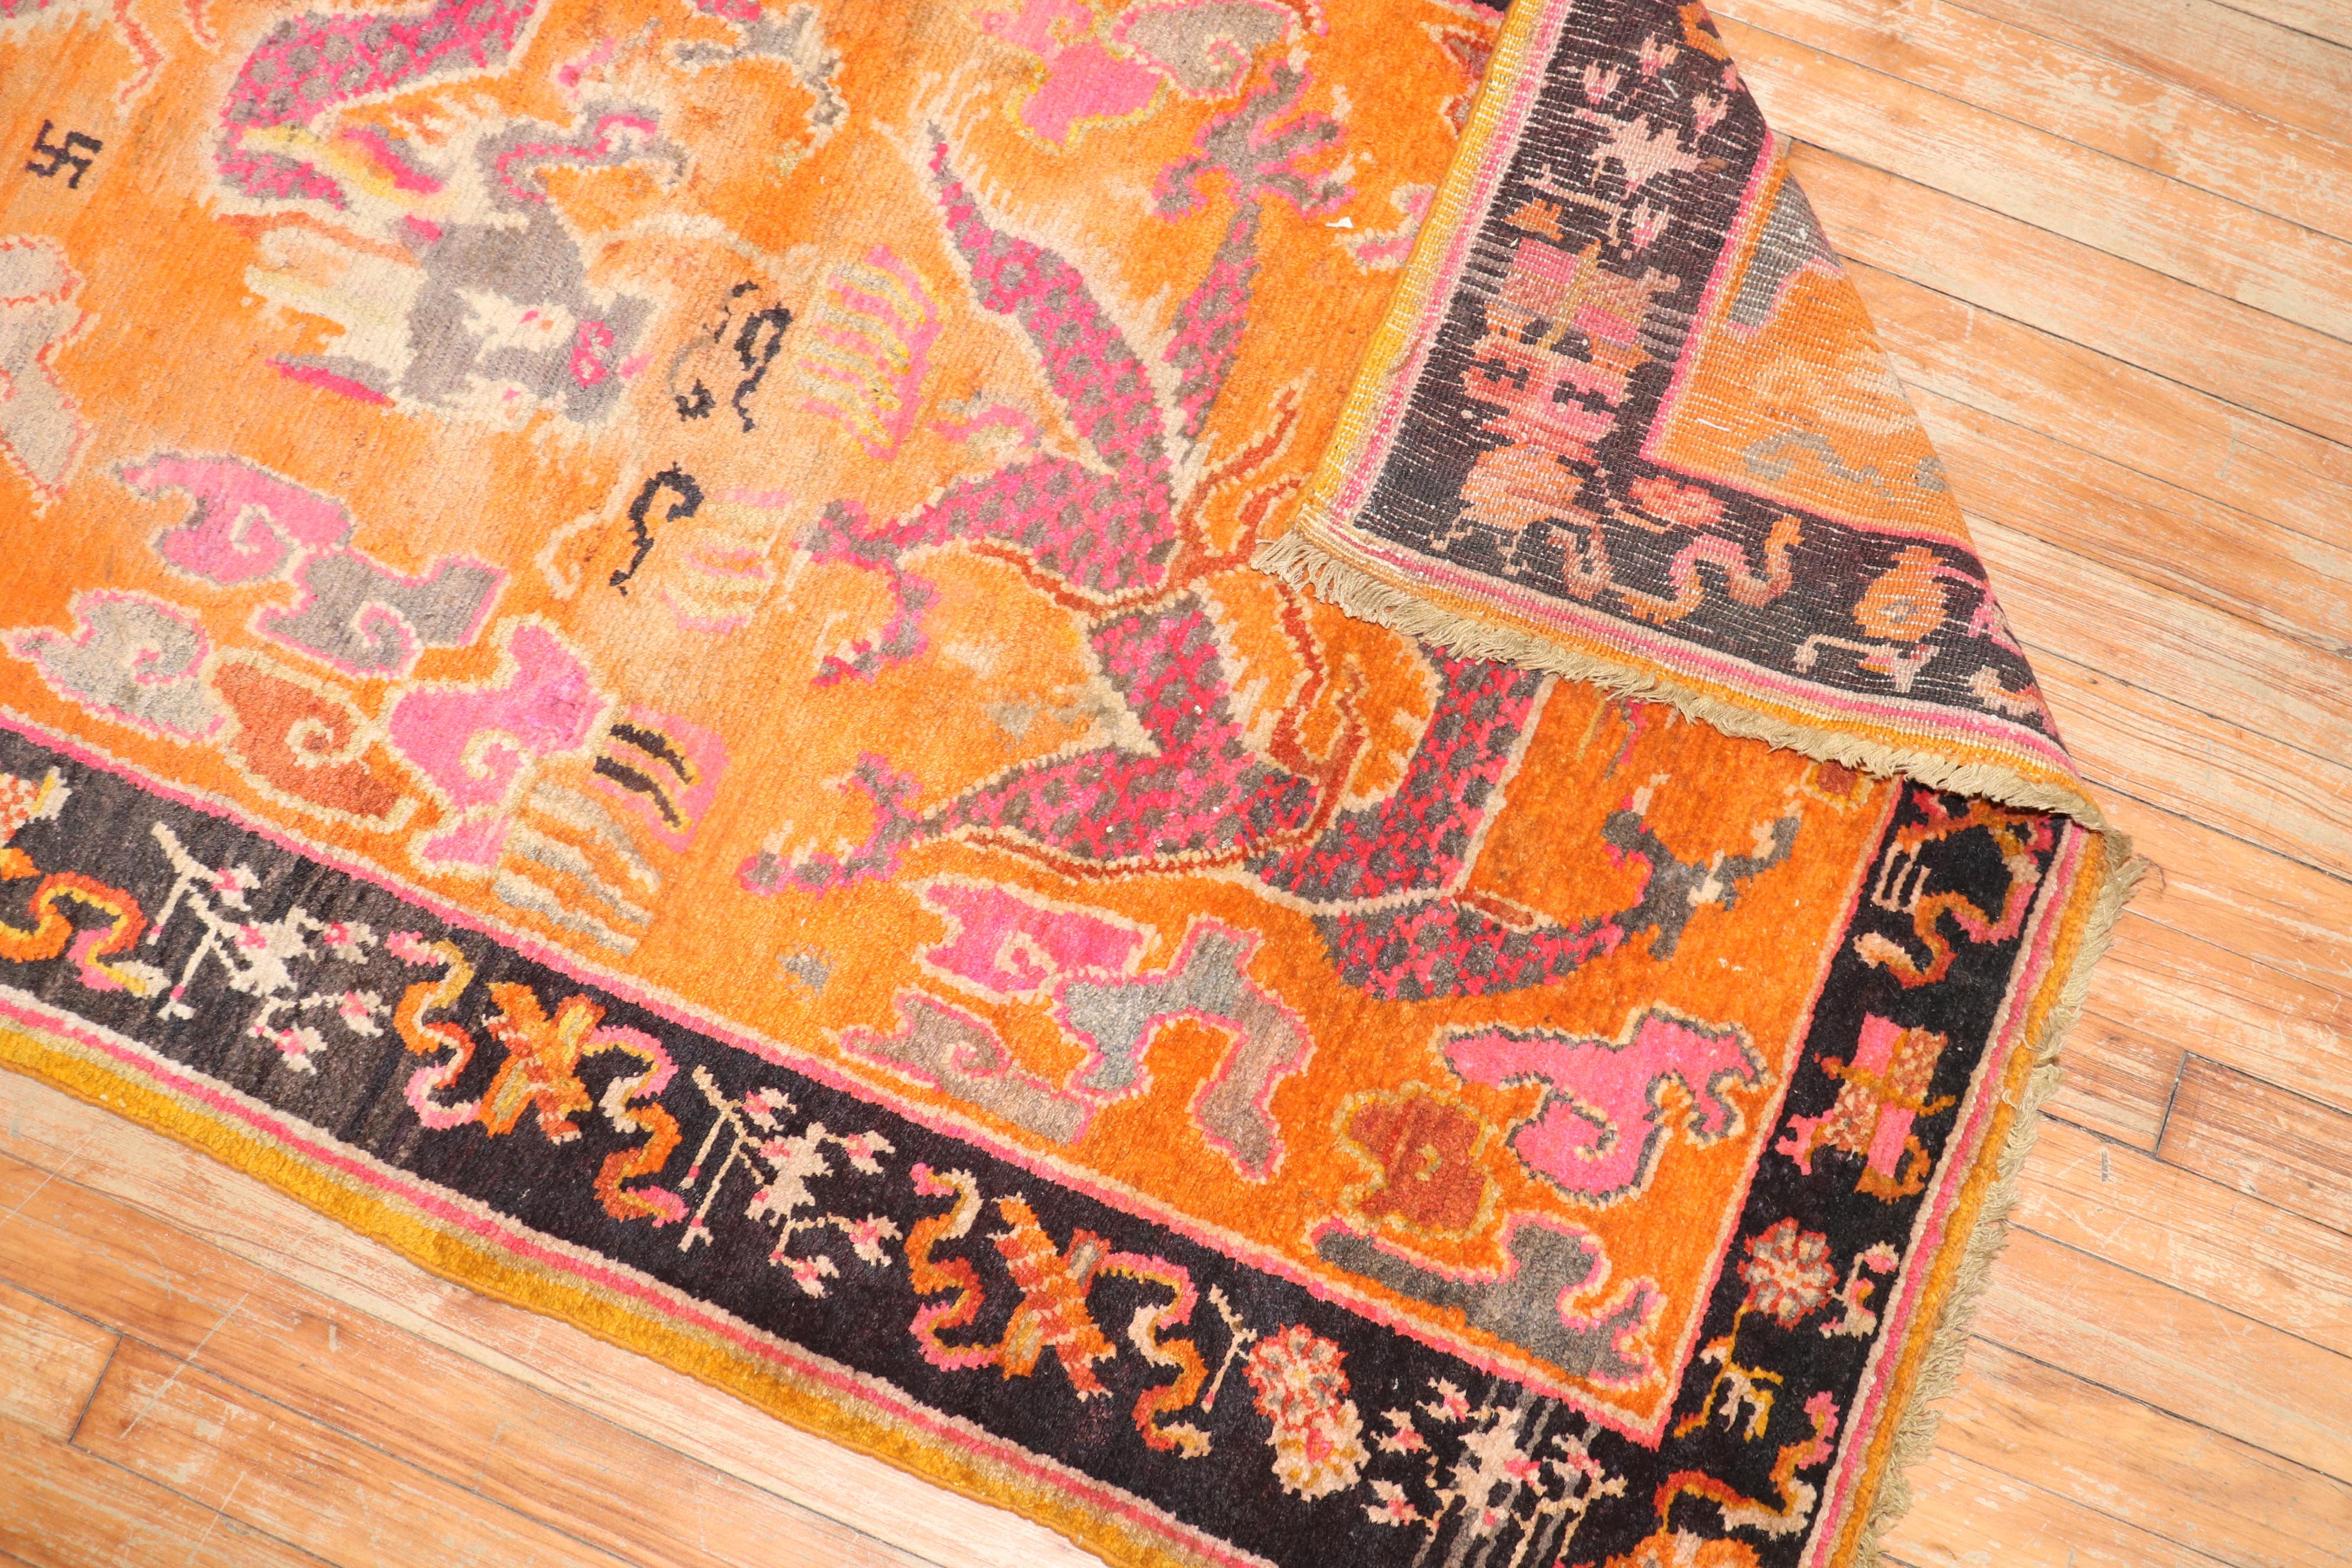 Colorful one-of-a-kind Tibetan rug from the 2nd quarter of the 20th century with a dragon motif on a bright orange field

Measures: 3'4'' x 5'7''.